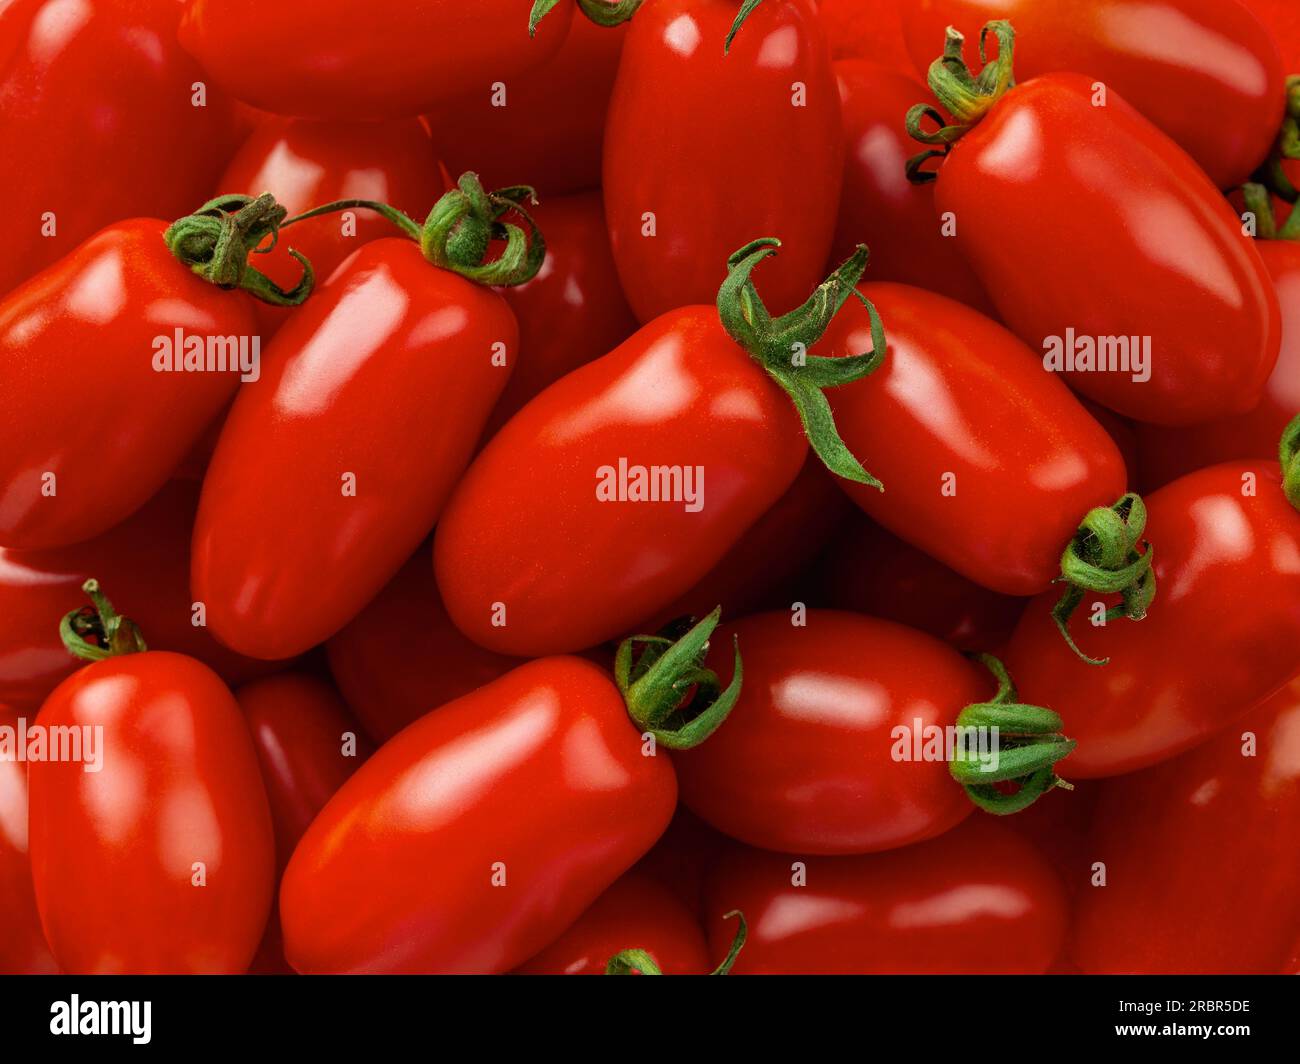 Raw Ornela cherry tomatoes macro background. Texture of small bottle shaped tomatoes. Ripe organic vegetables closeup. Healthy eating vegetarian food Stock Photo